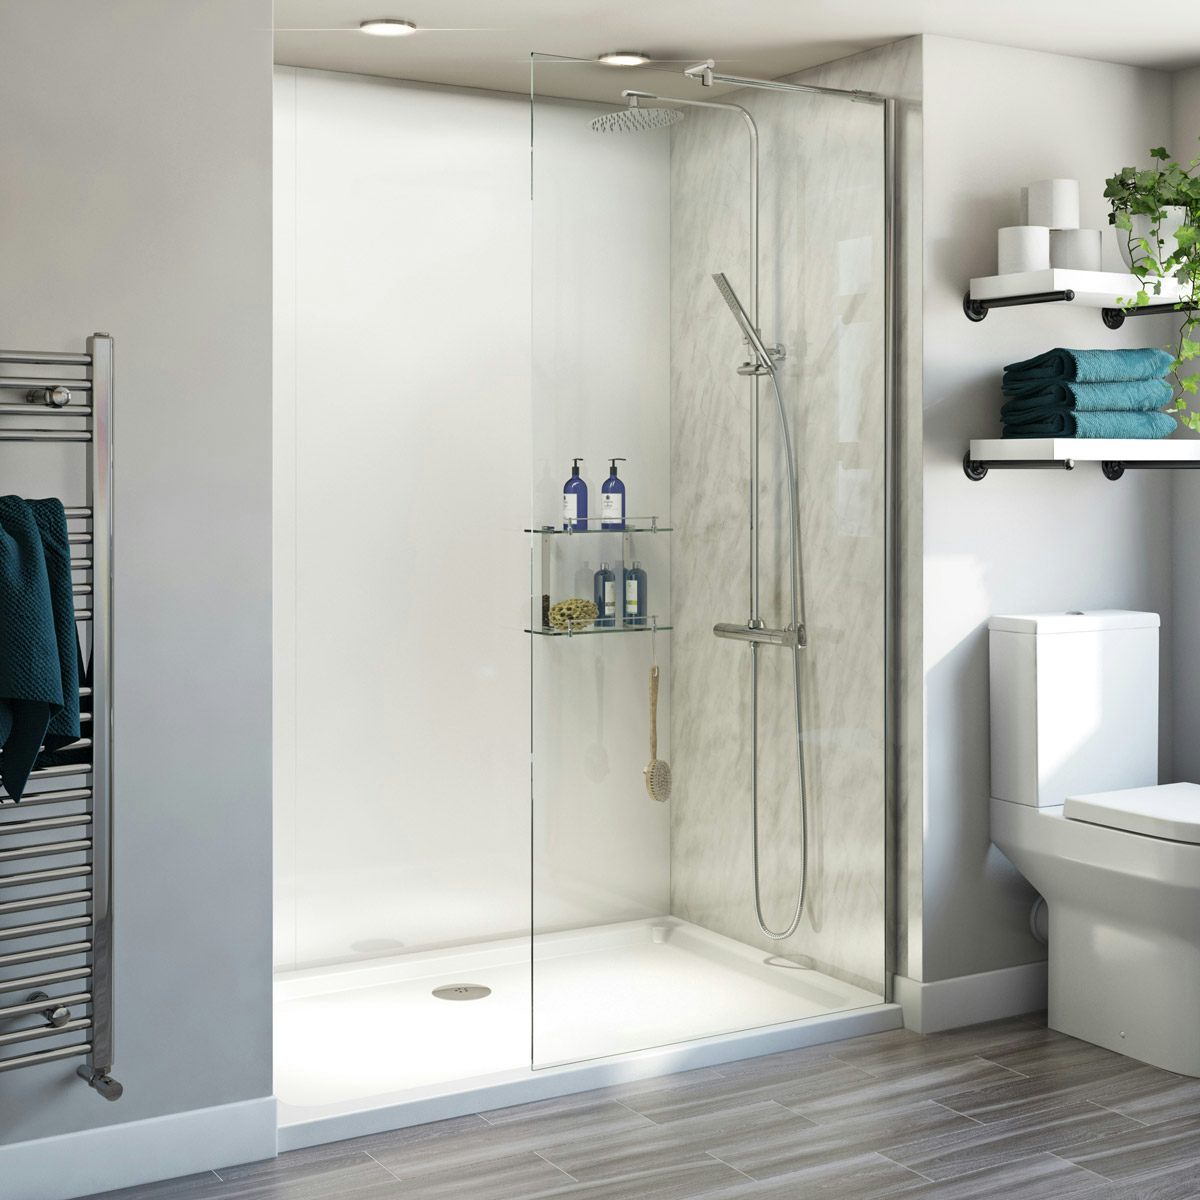 Orchard 6mm walk in glass panel with stone shower tray 1600 x 800 | VictoriaPlum.com